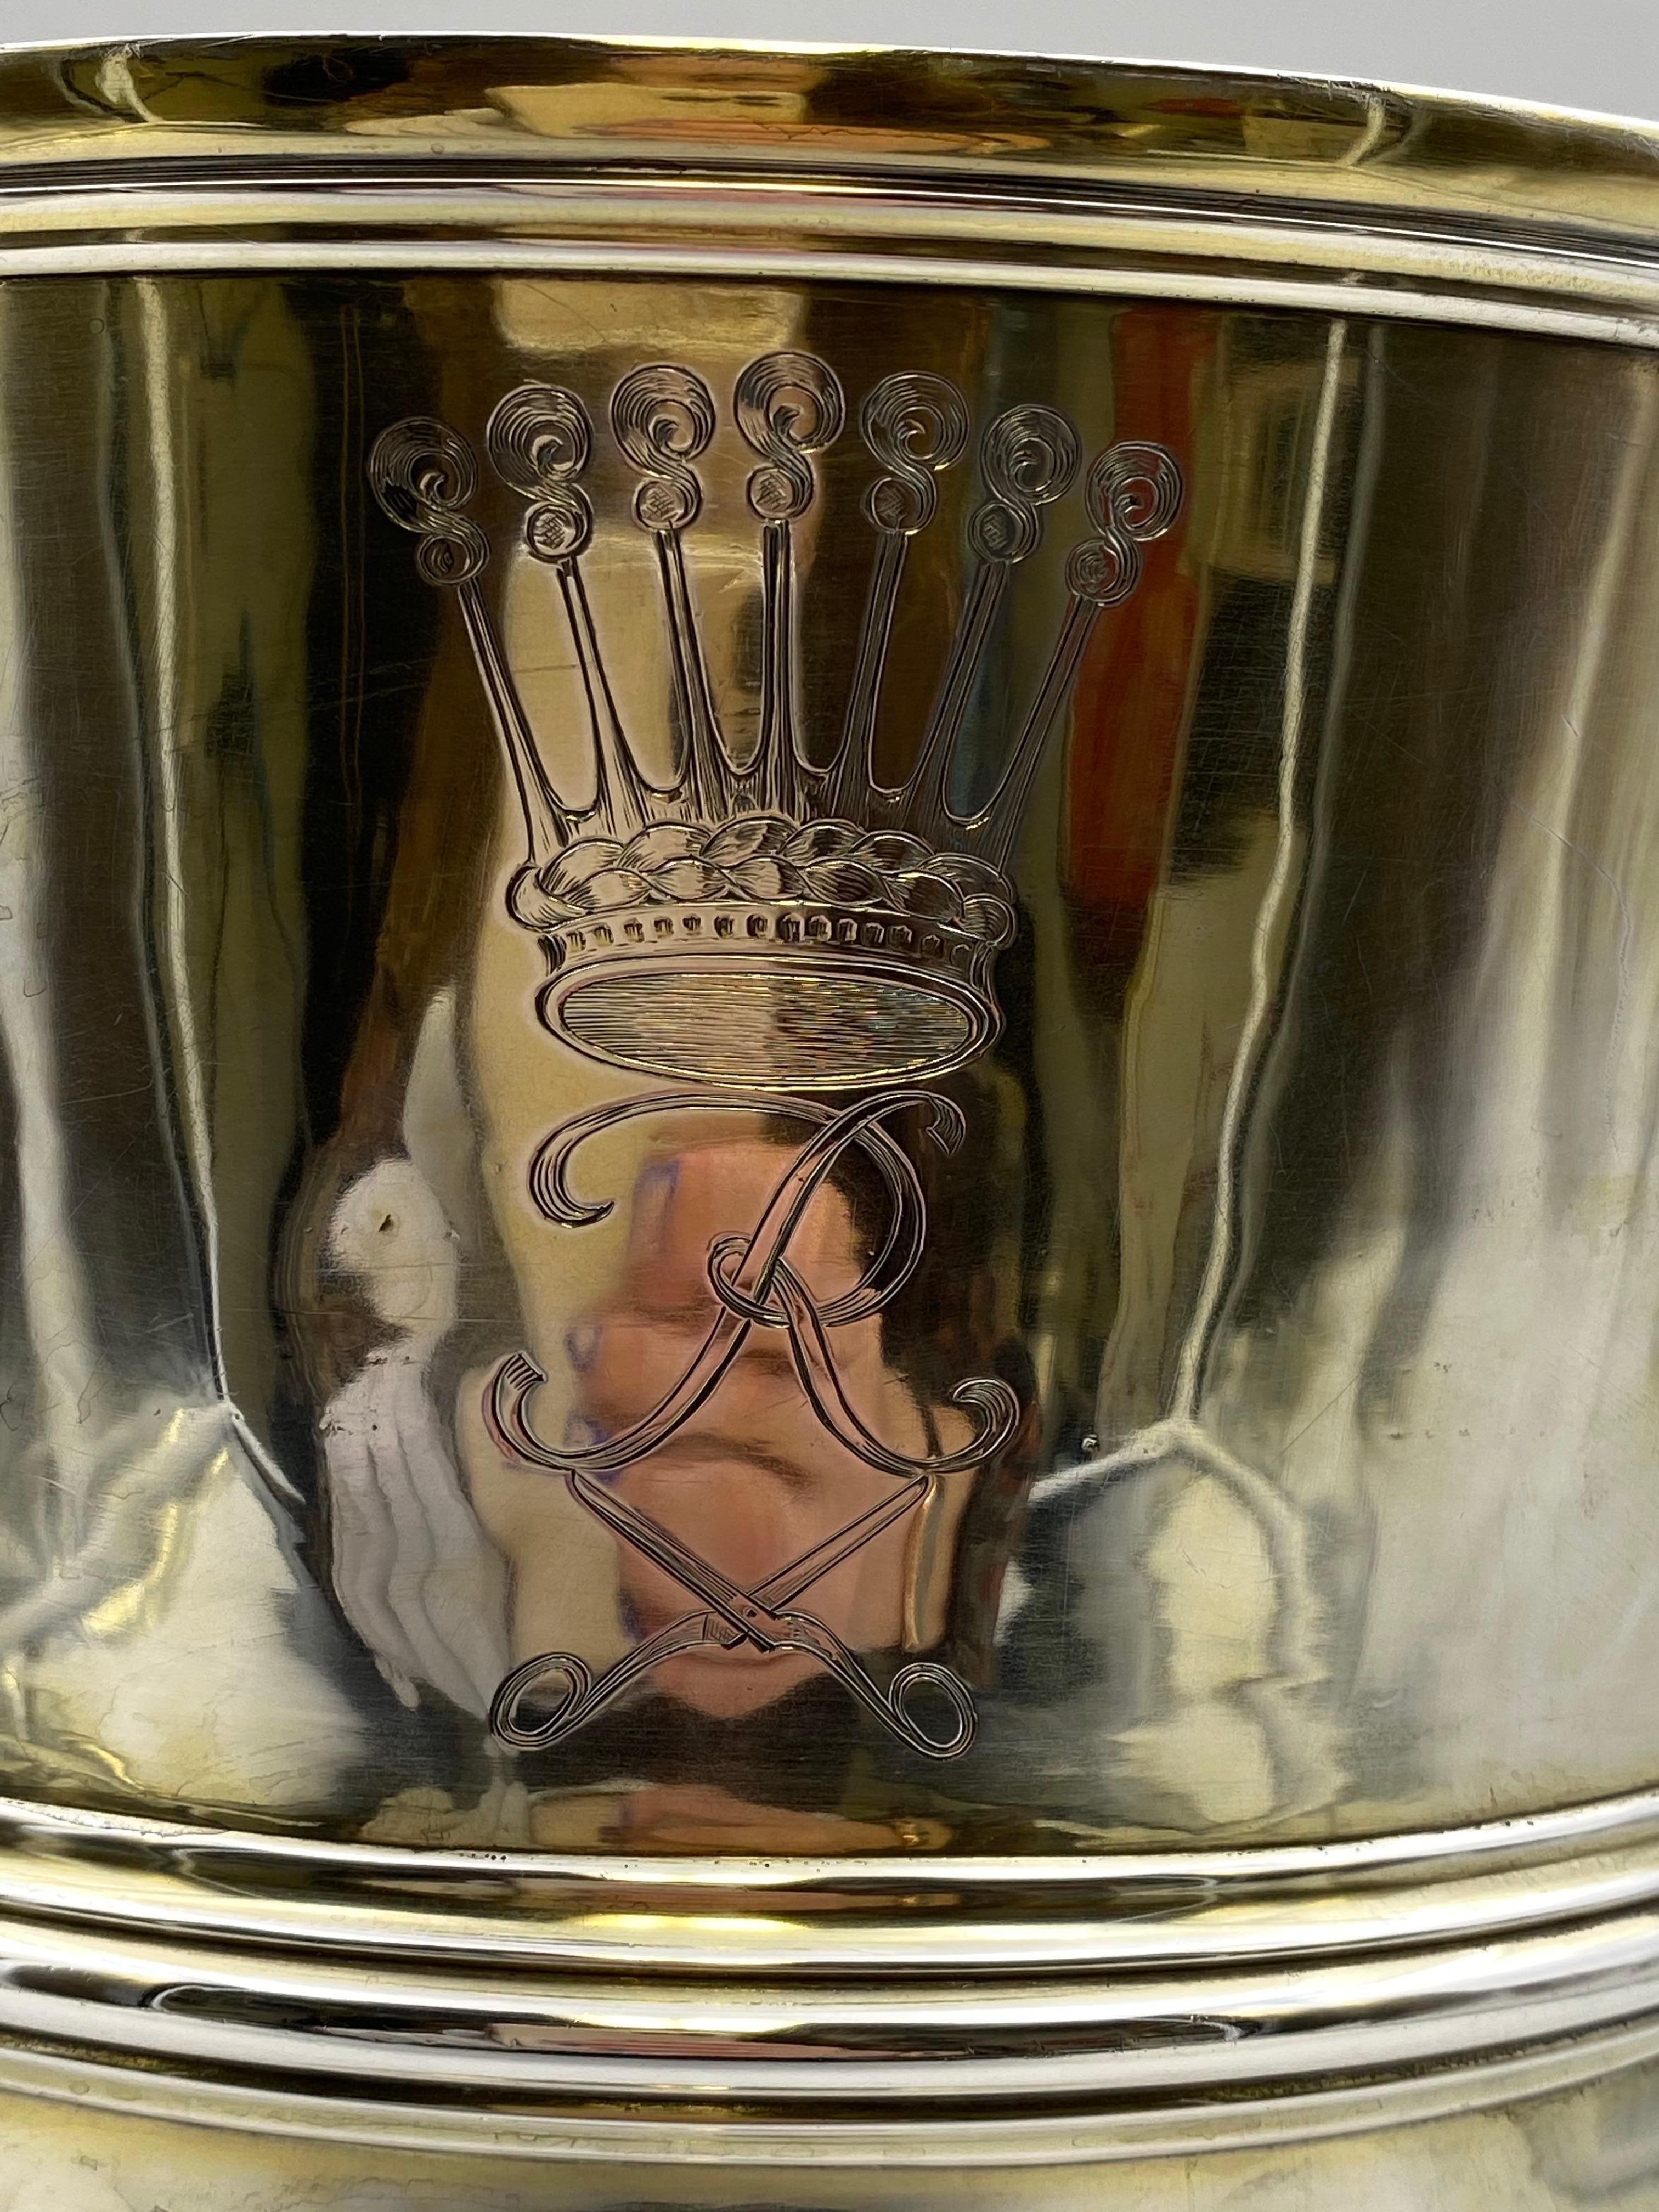 Partially gilt sterling silver two-handled trophy cup by Edinburgh-based, Scottish silversmith Wilson & Sharp, which operated a store with luxury goods since the early 19th century. This exquisite trophy bears a dedicatory inscription to Raymond Art